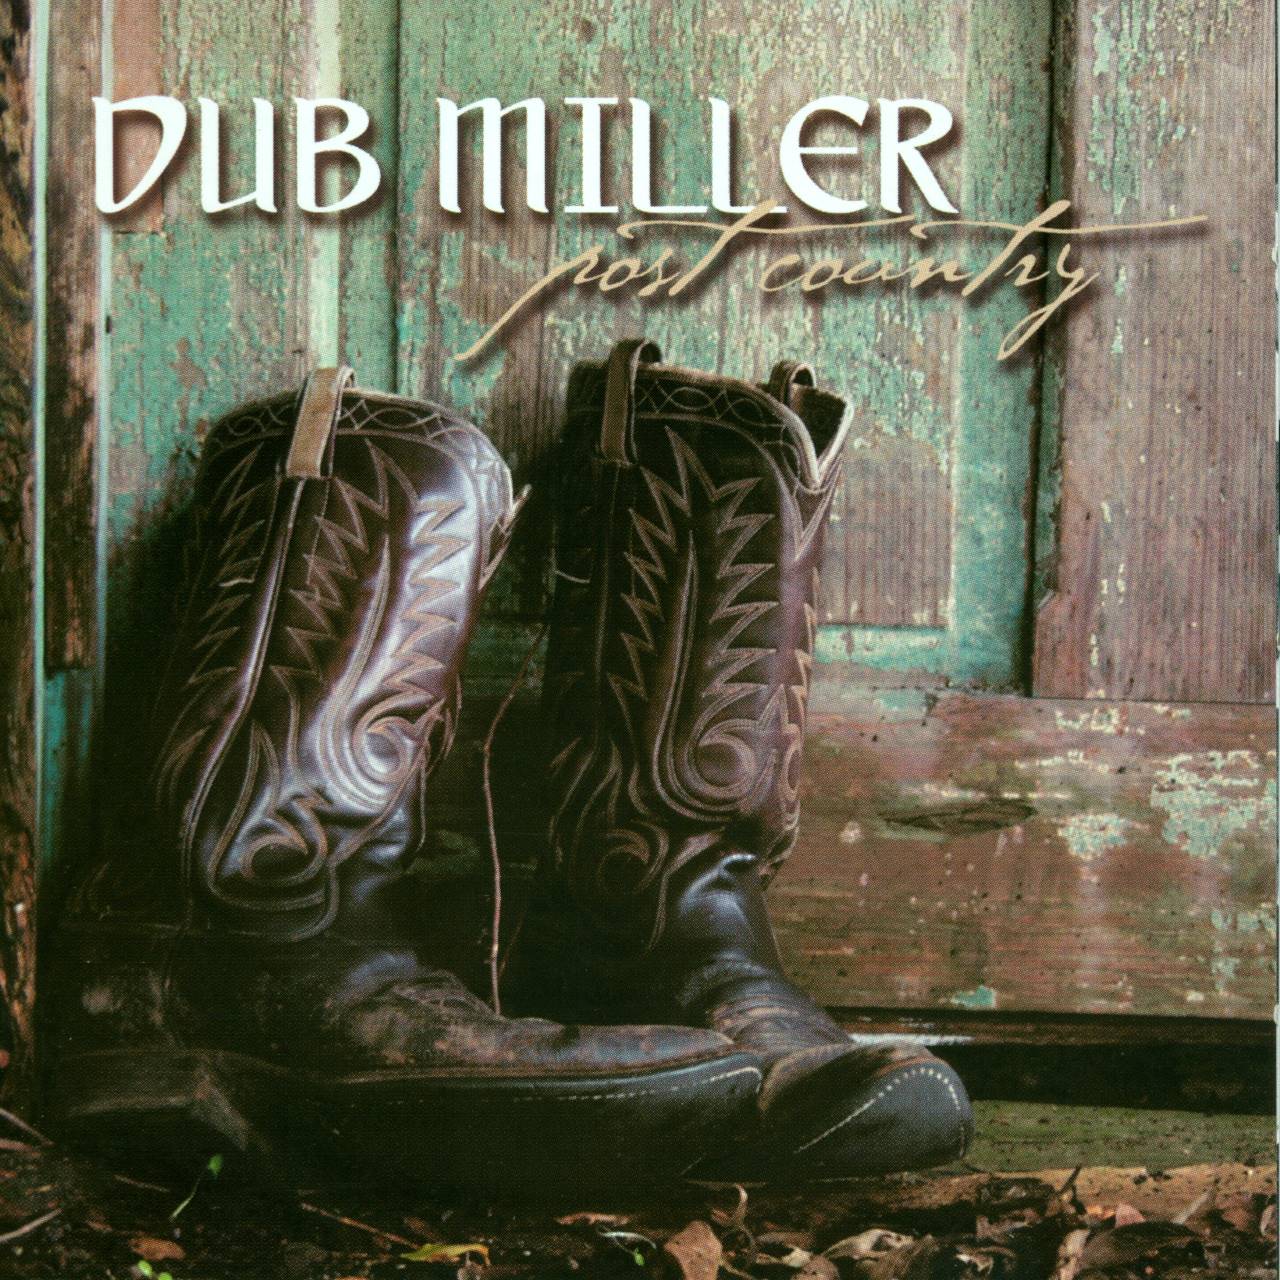 Dub Miller - Post Country cover album